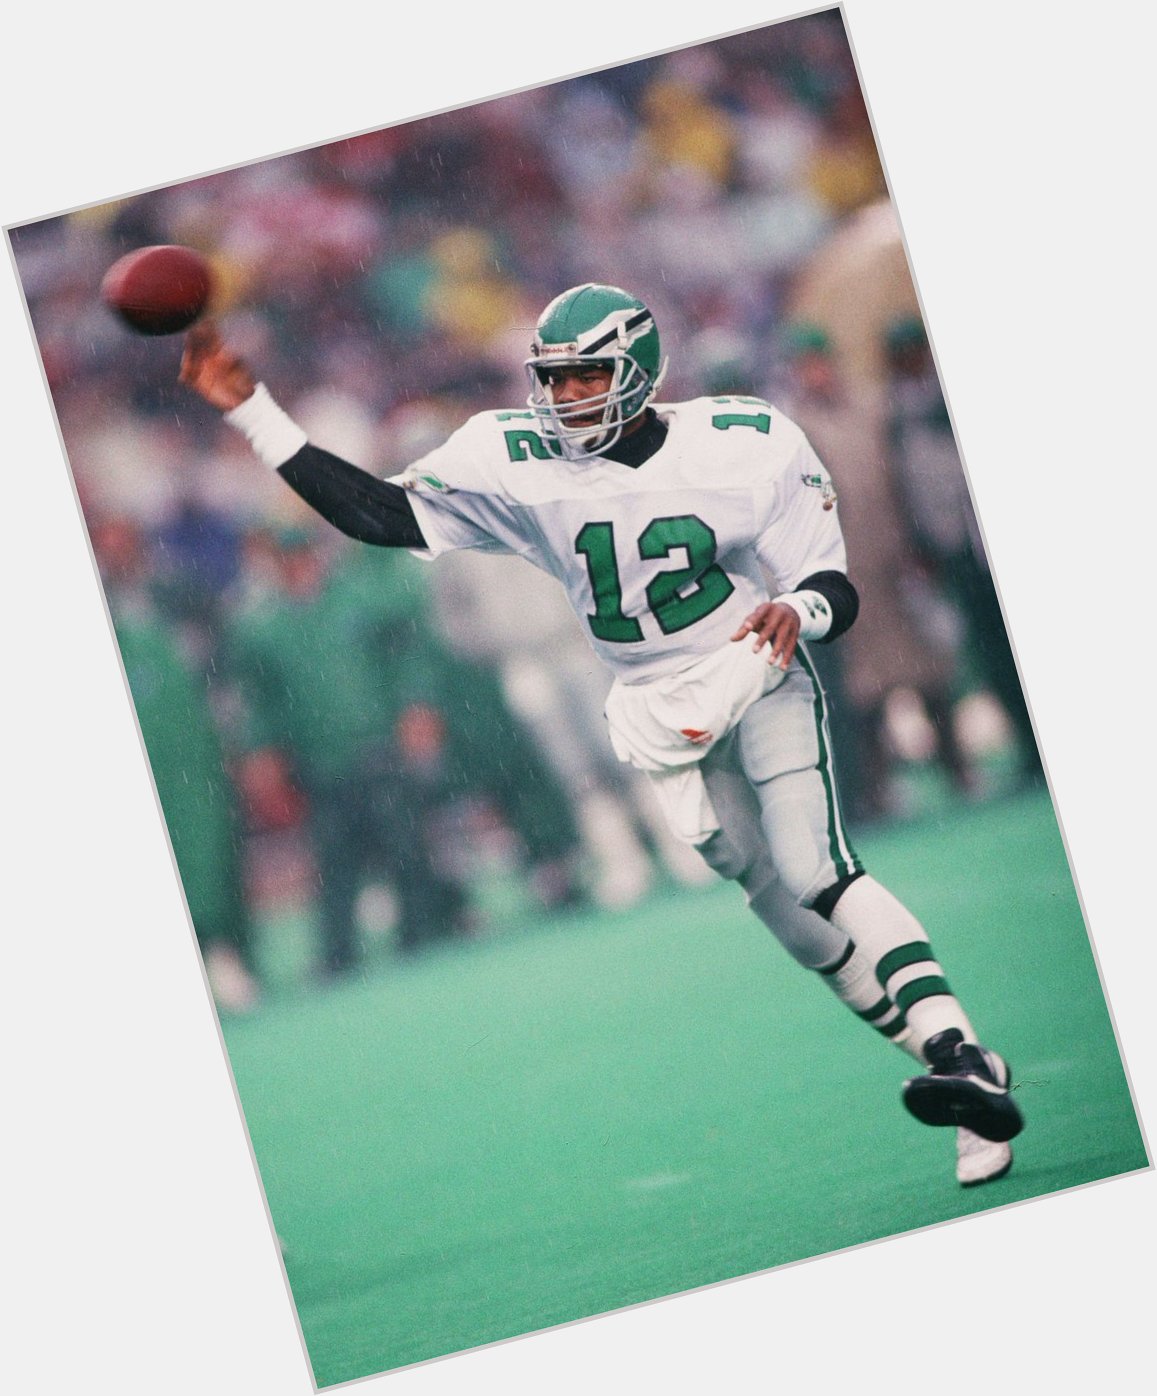 Happy Birthday to the Ultimate Weapon, Randall Cunningham! 